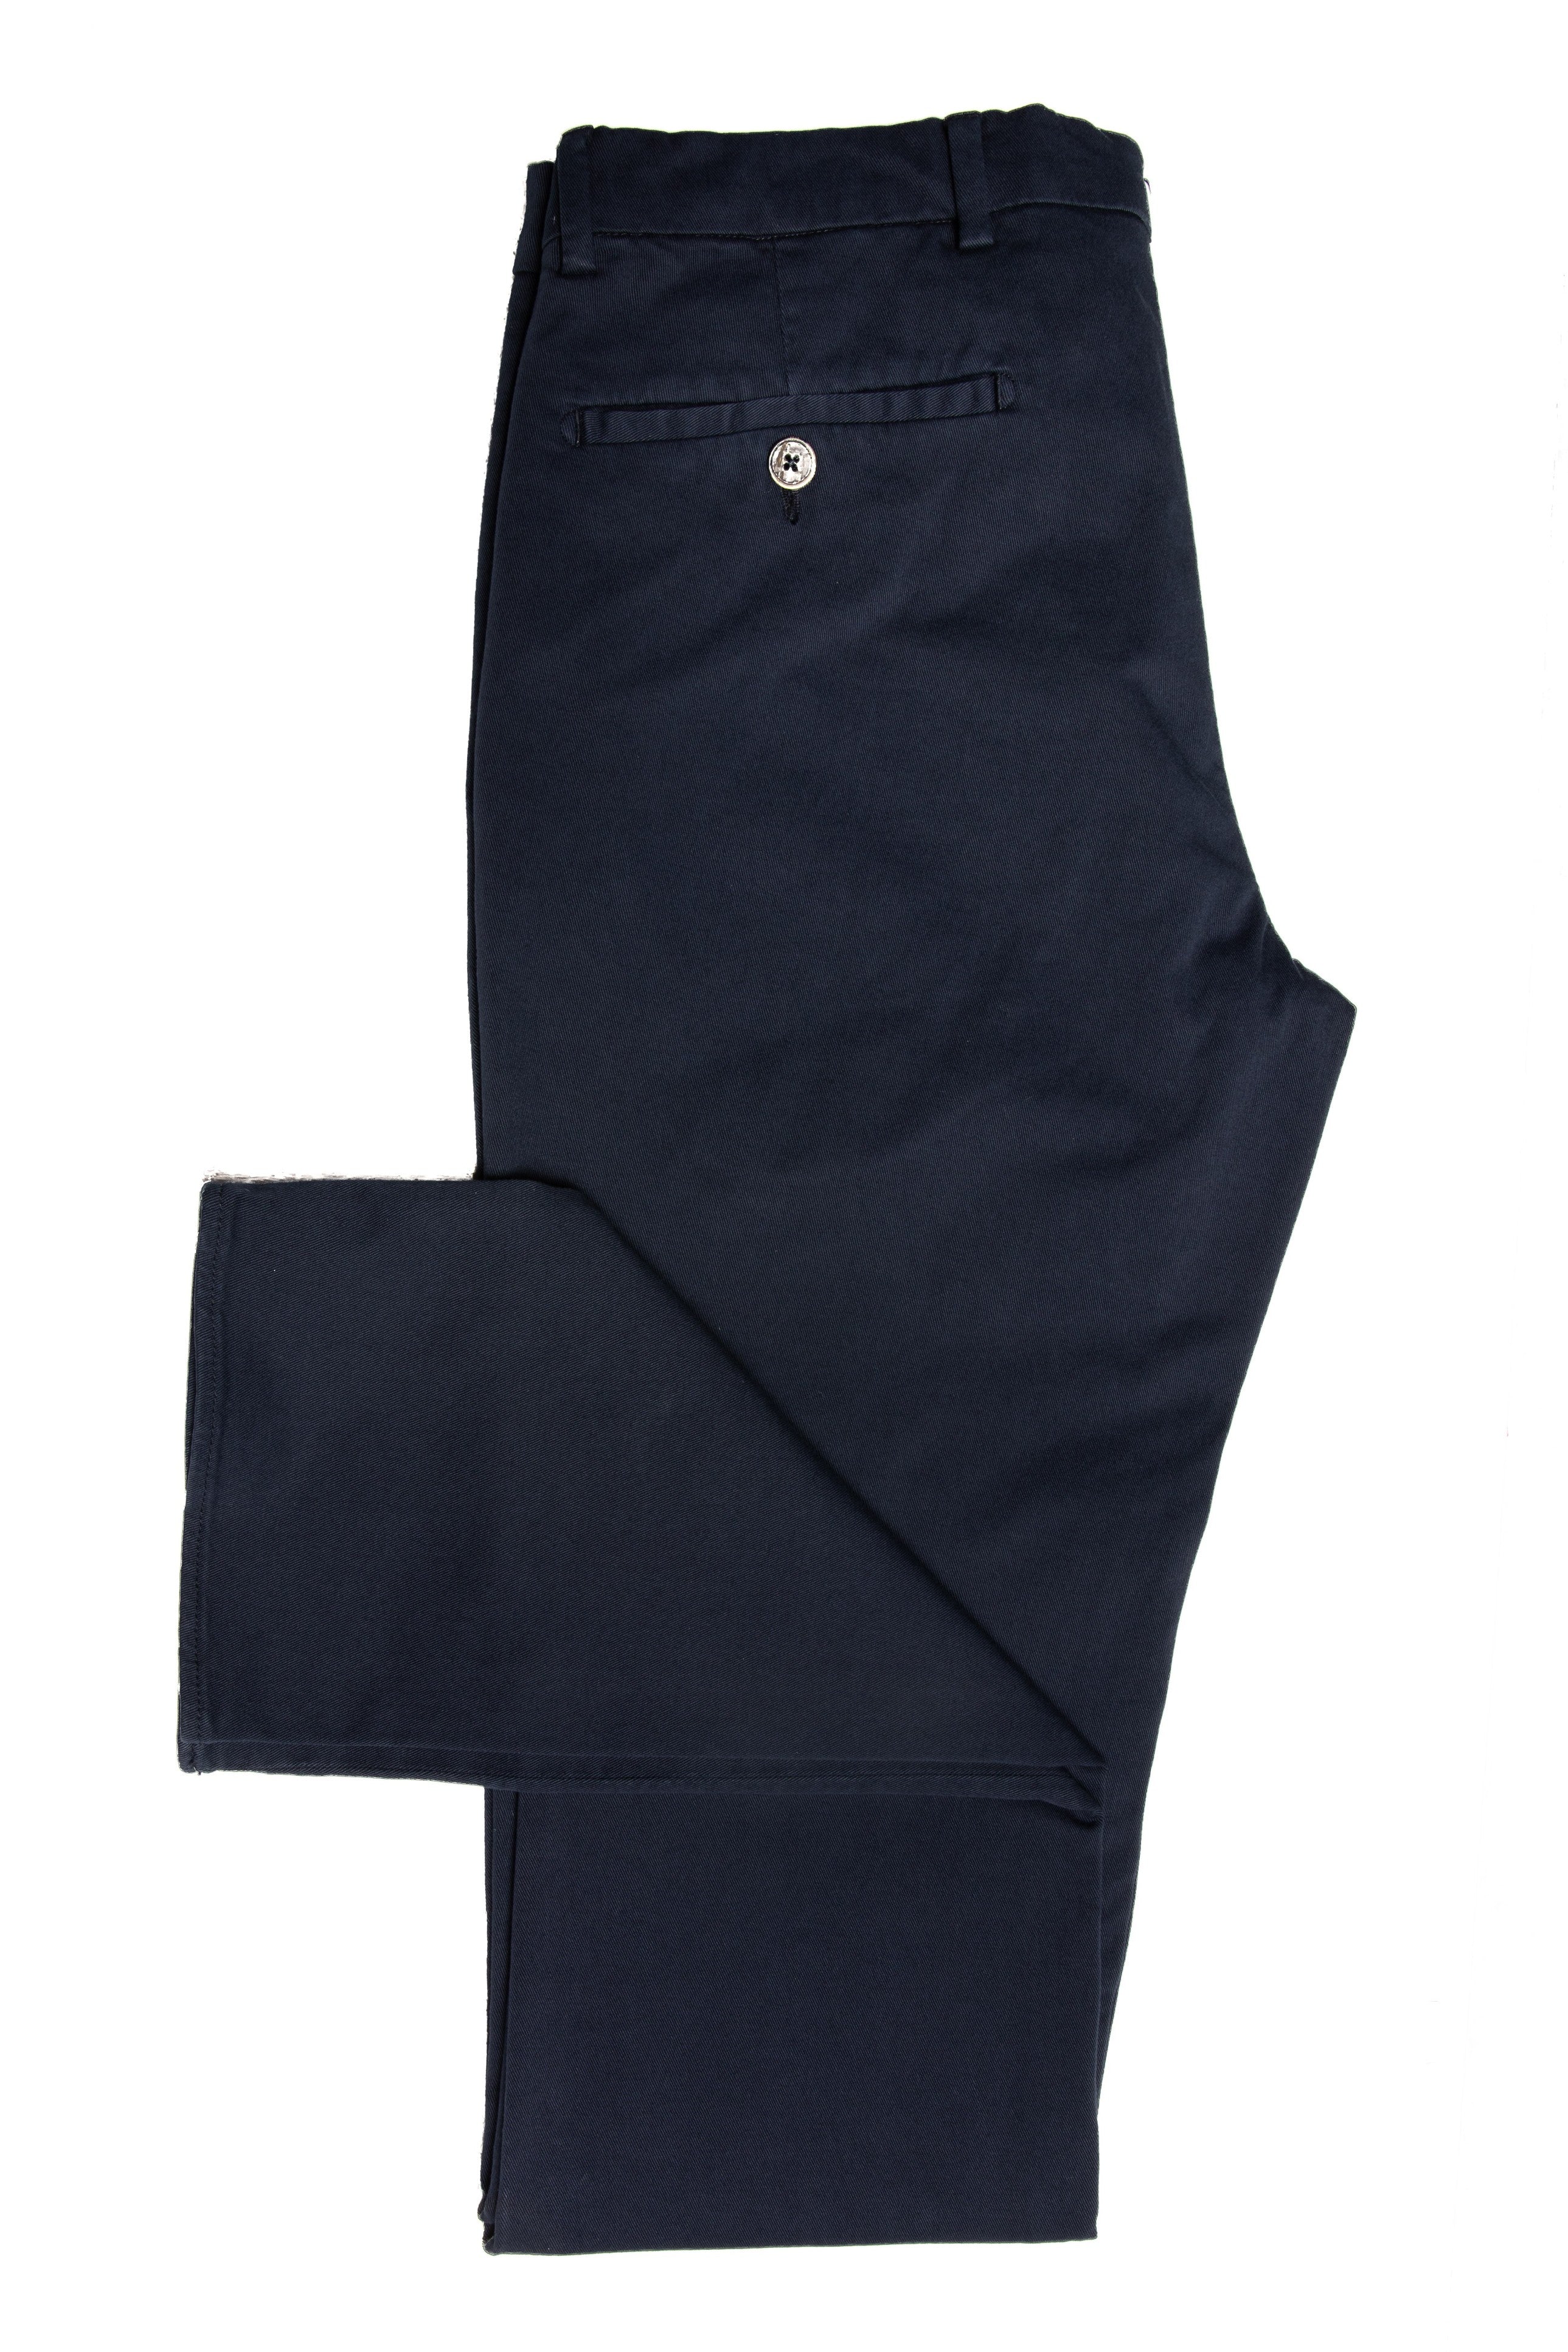 Chino casual in cotone blu navy